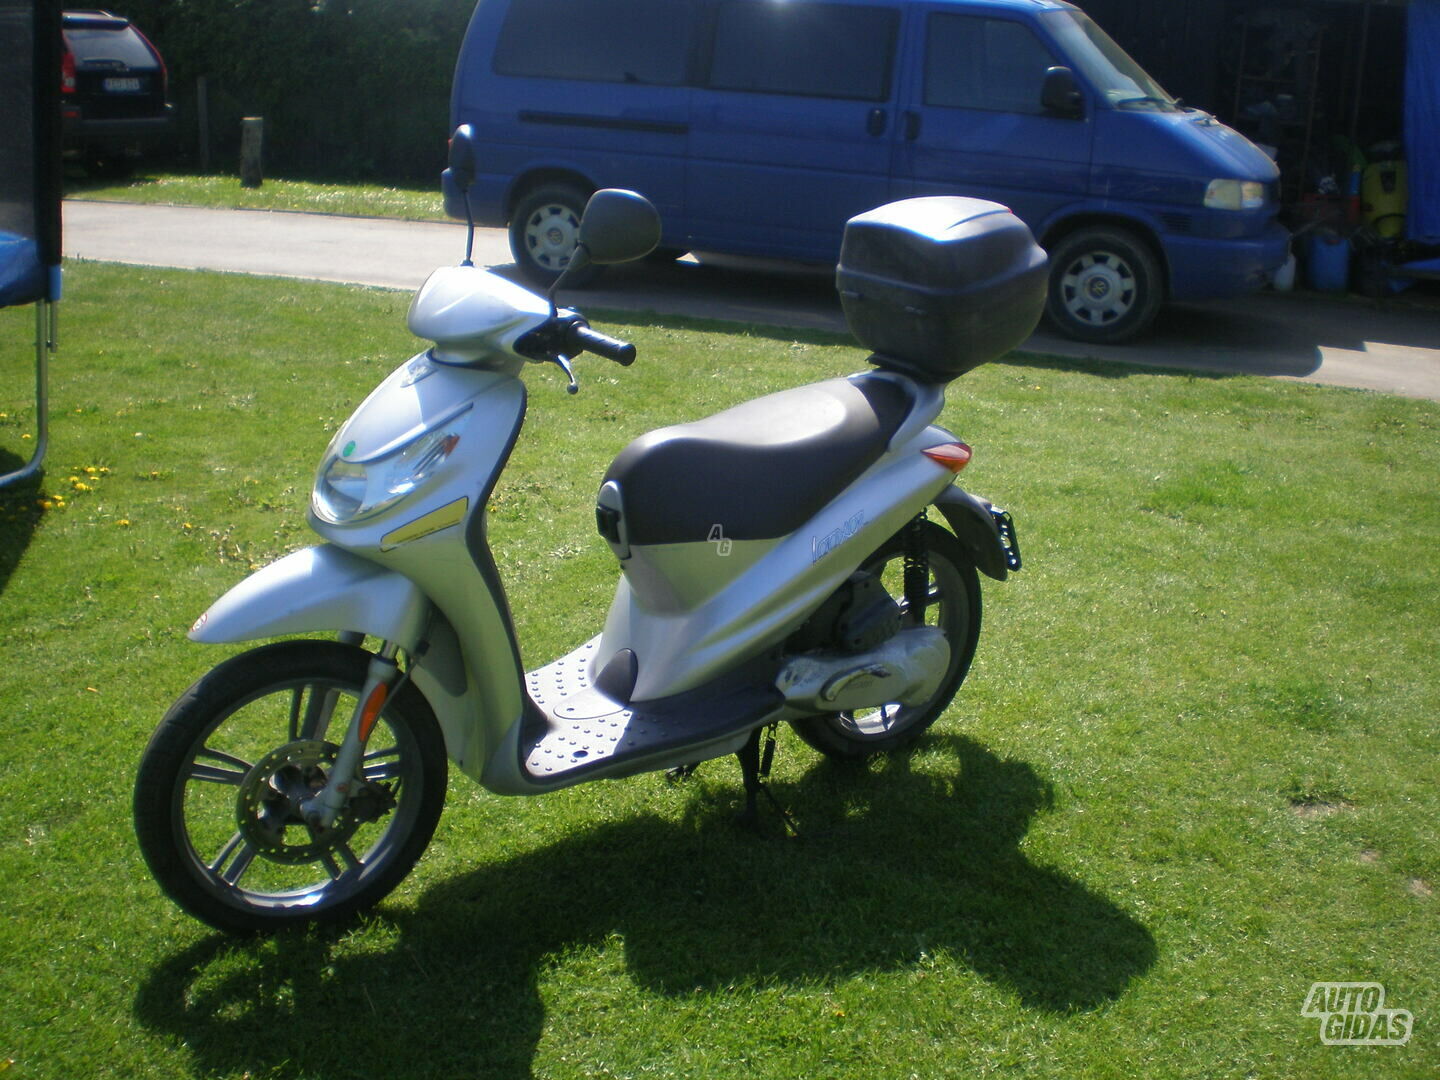 Peugeot Looxor 2006 y Scooter / moped